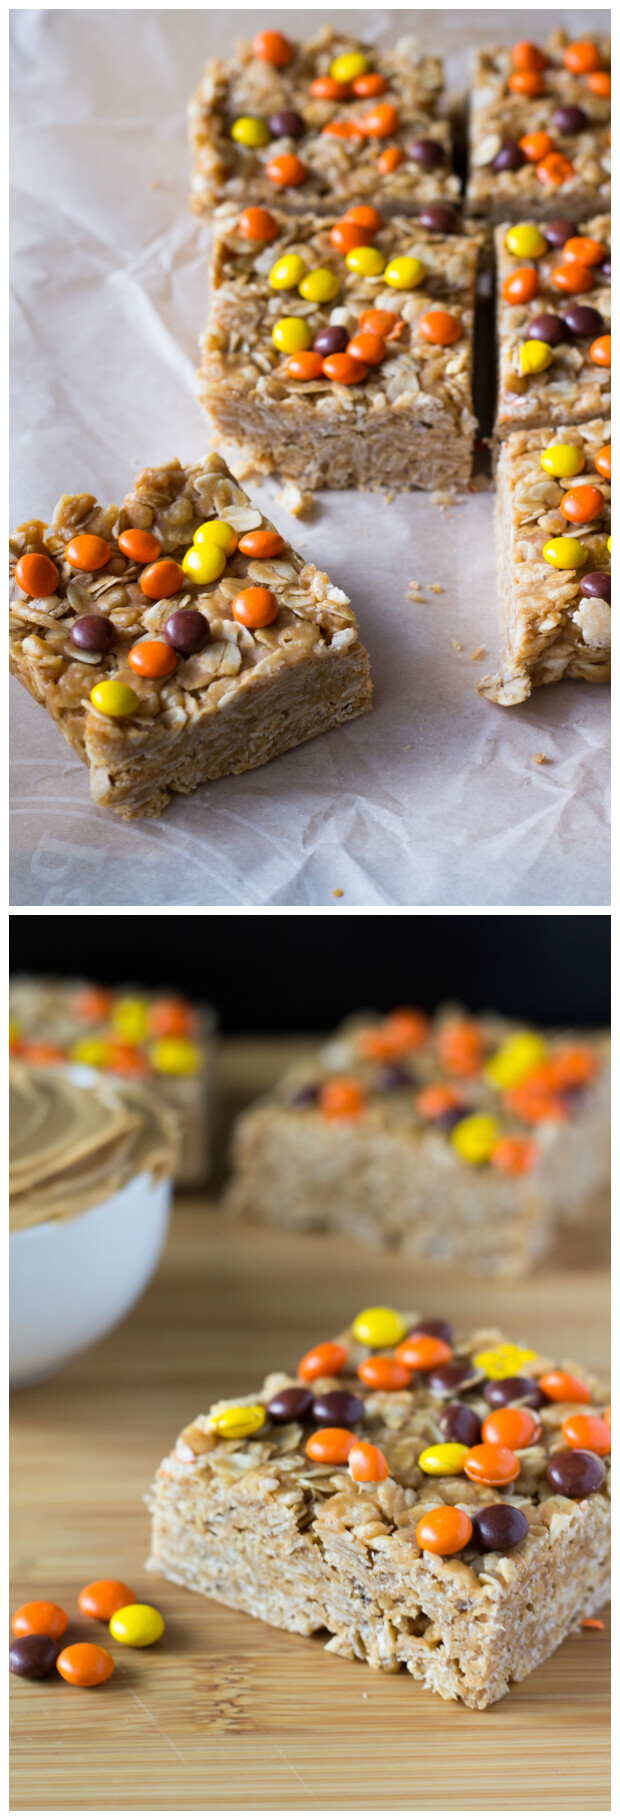 Make these super easy & super delicious Peanut Butter Granola Bars. Topped with Reese's Pieces - kids & adults will love these treats. 